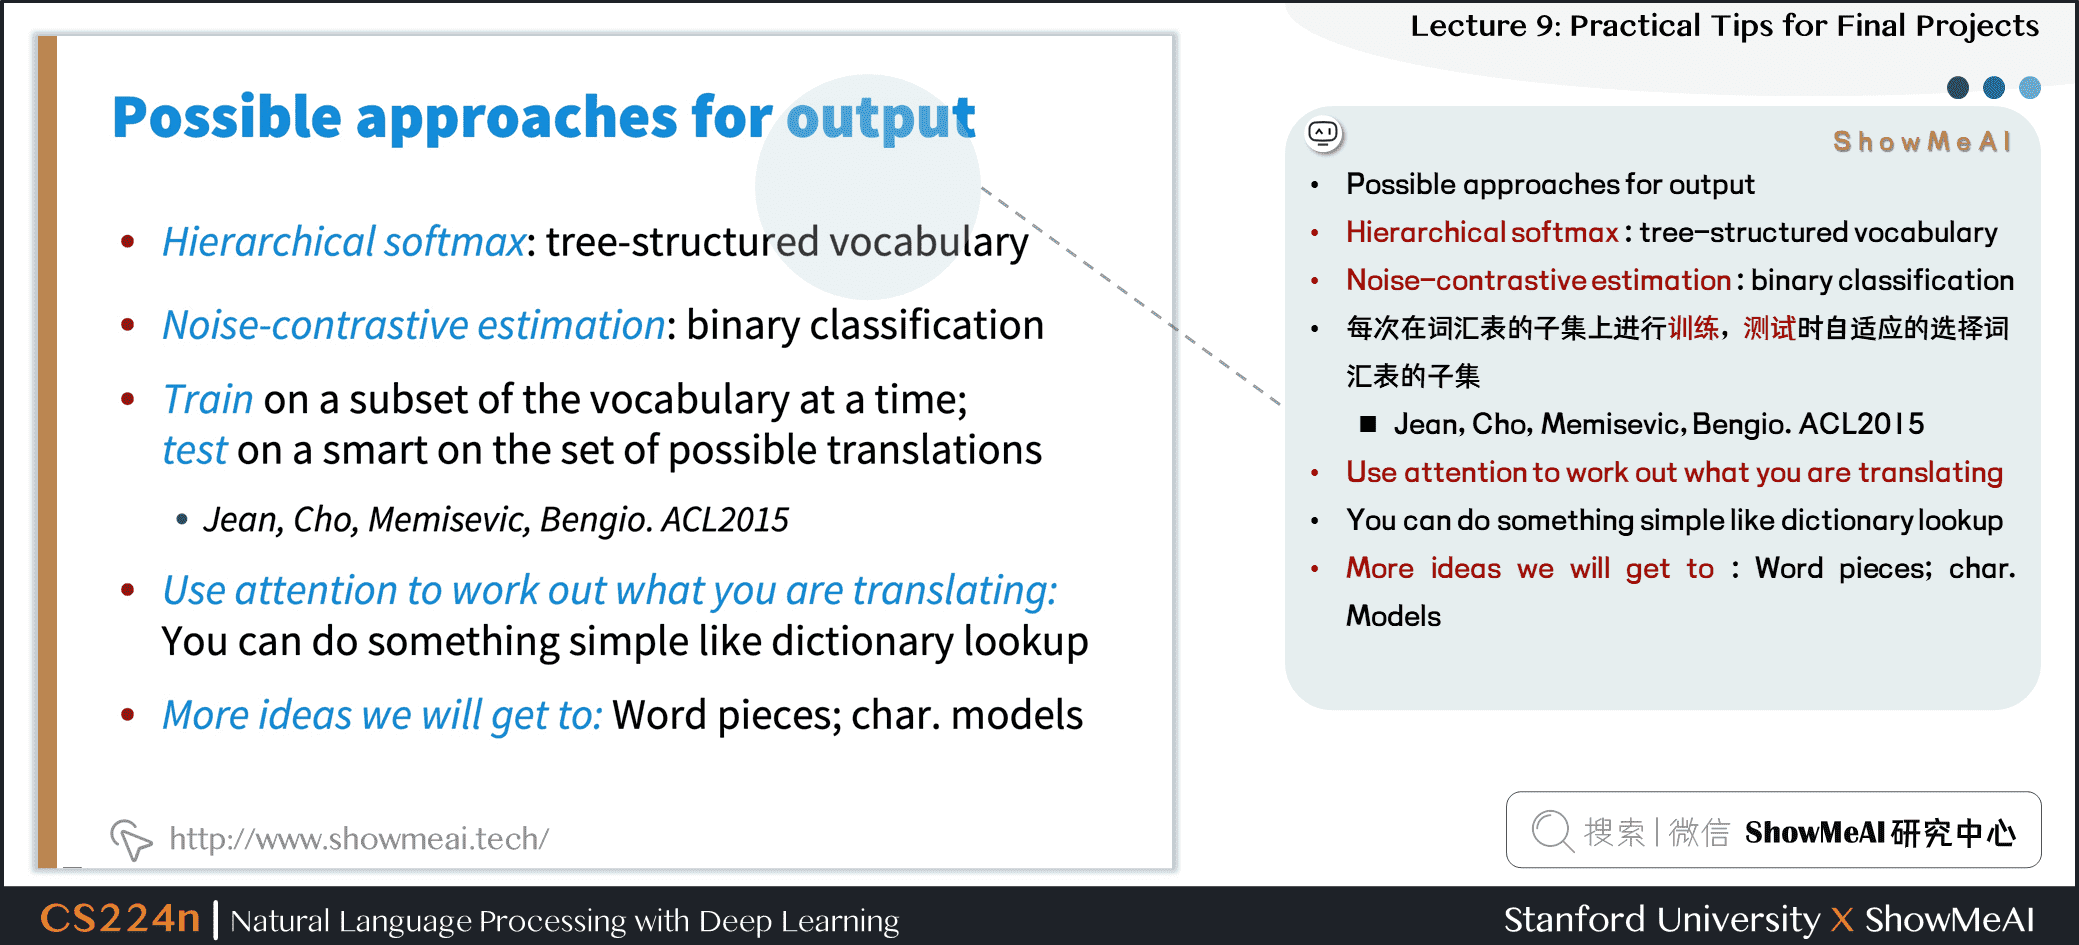 Possible approaches for output